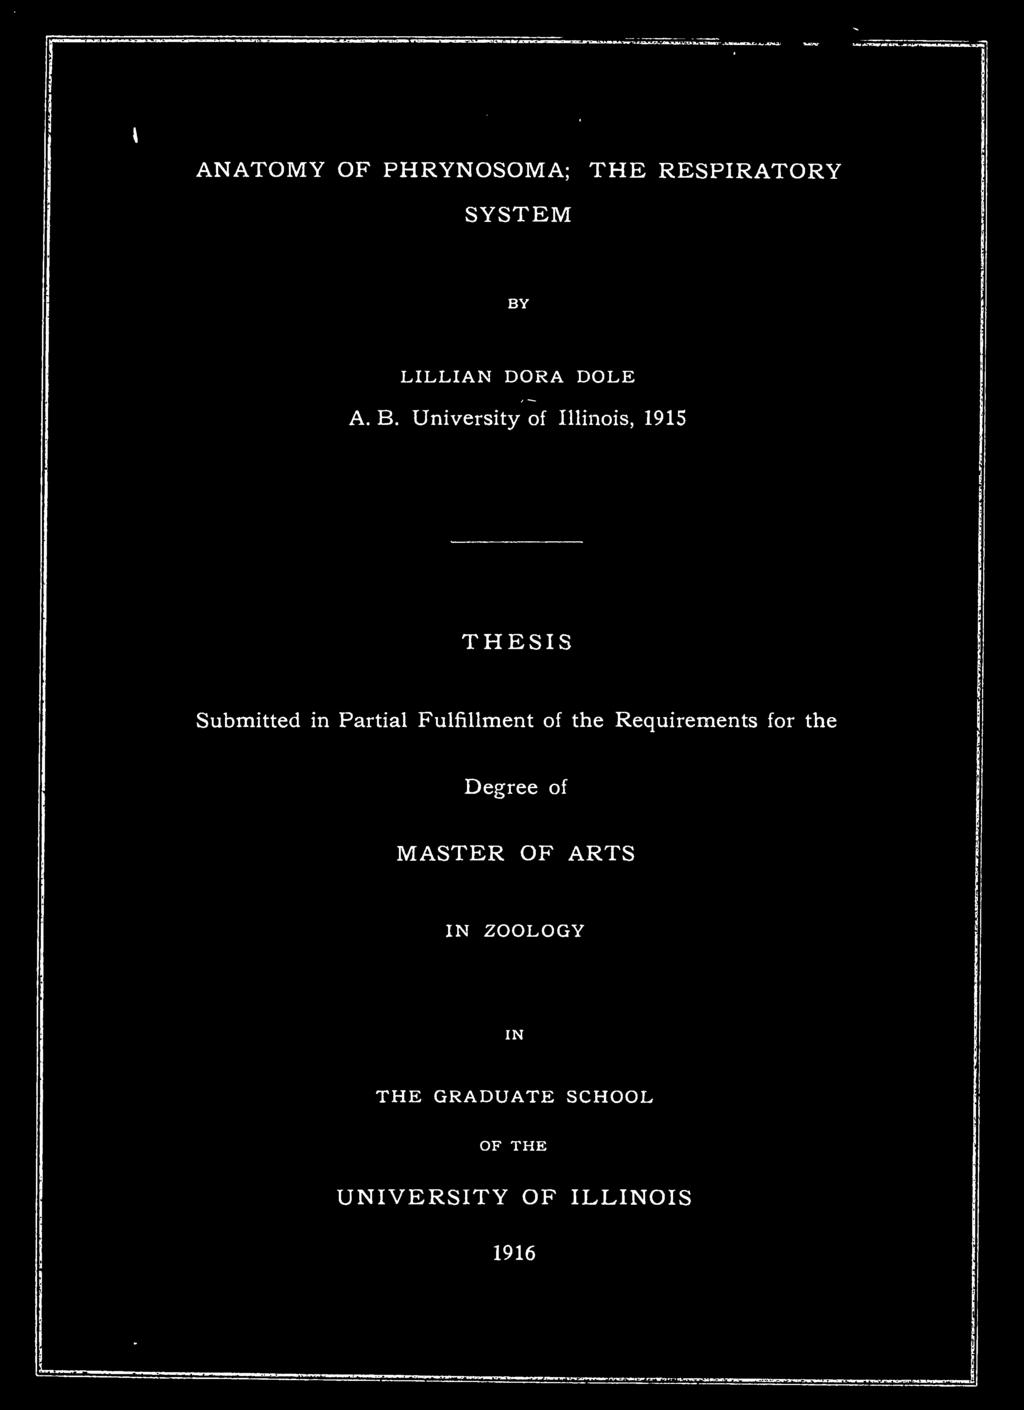 University of Illinois, 1915 THESIS Submitted in Partial